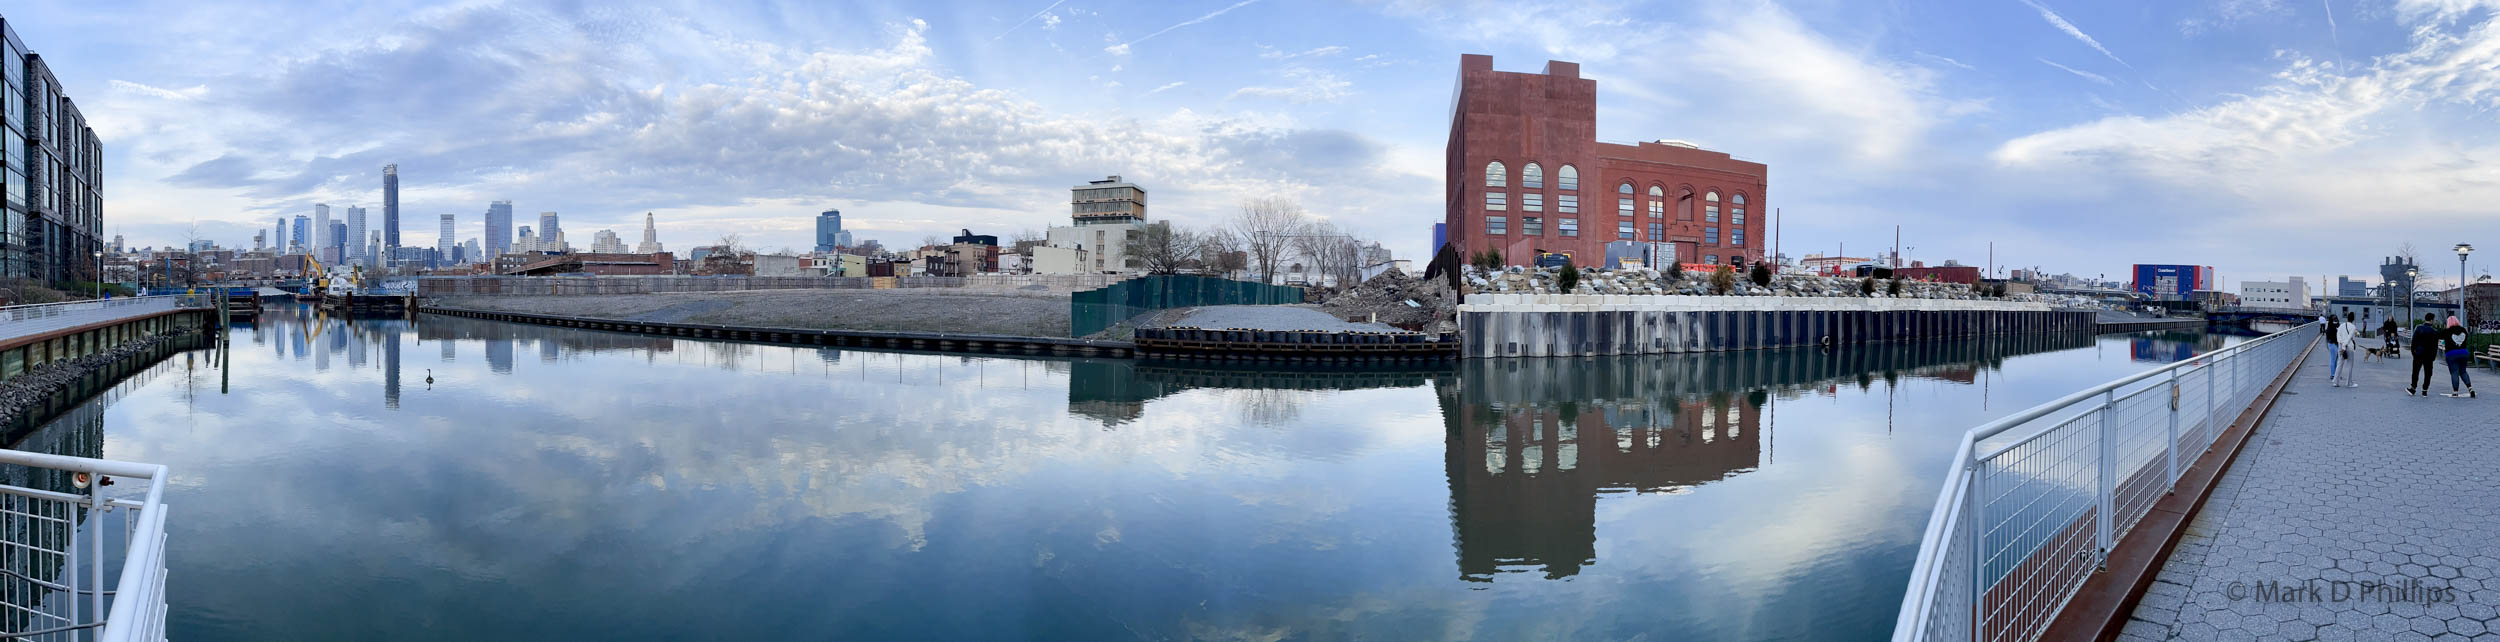 Gowanus Canal on April 13, 2022,, coming out of the COVID-19 pandemic. The landscape has changed redically with the banks cleared of old buildings for gentrification. ©Mark D Phillips